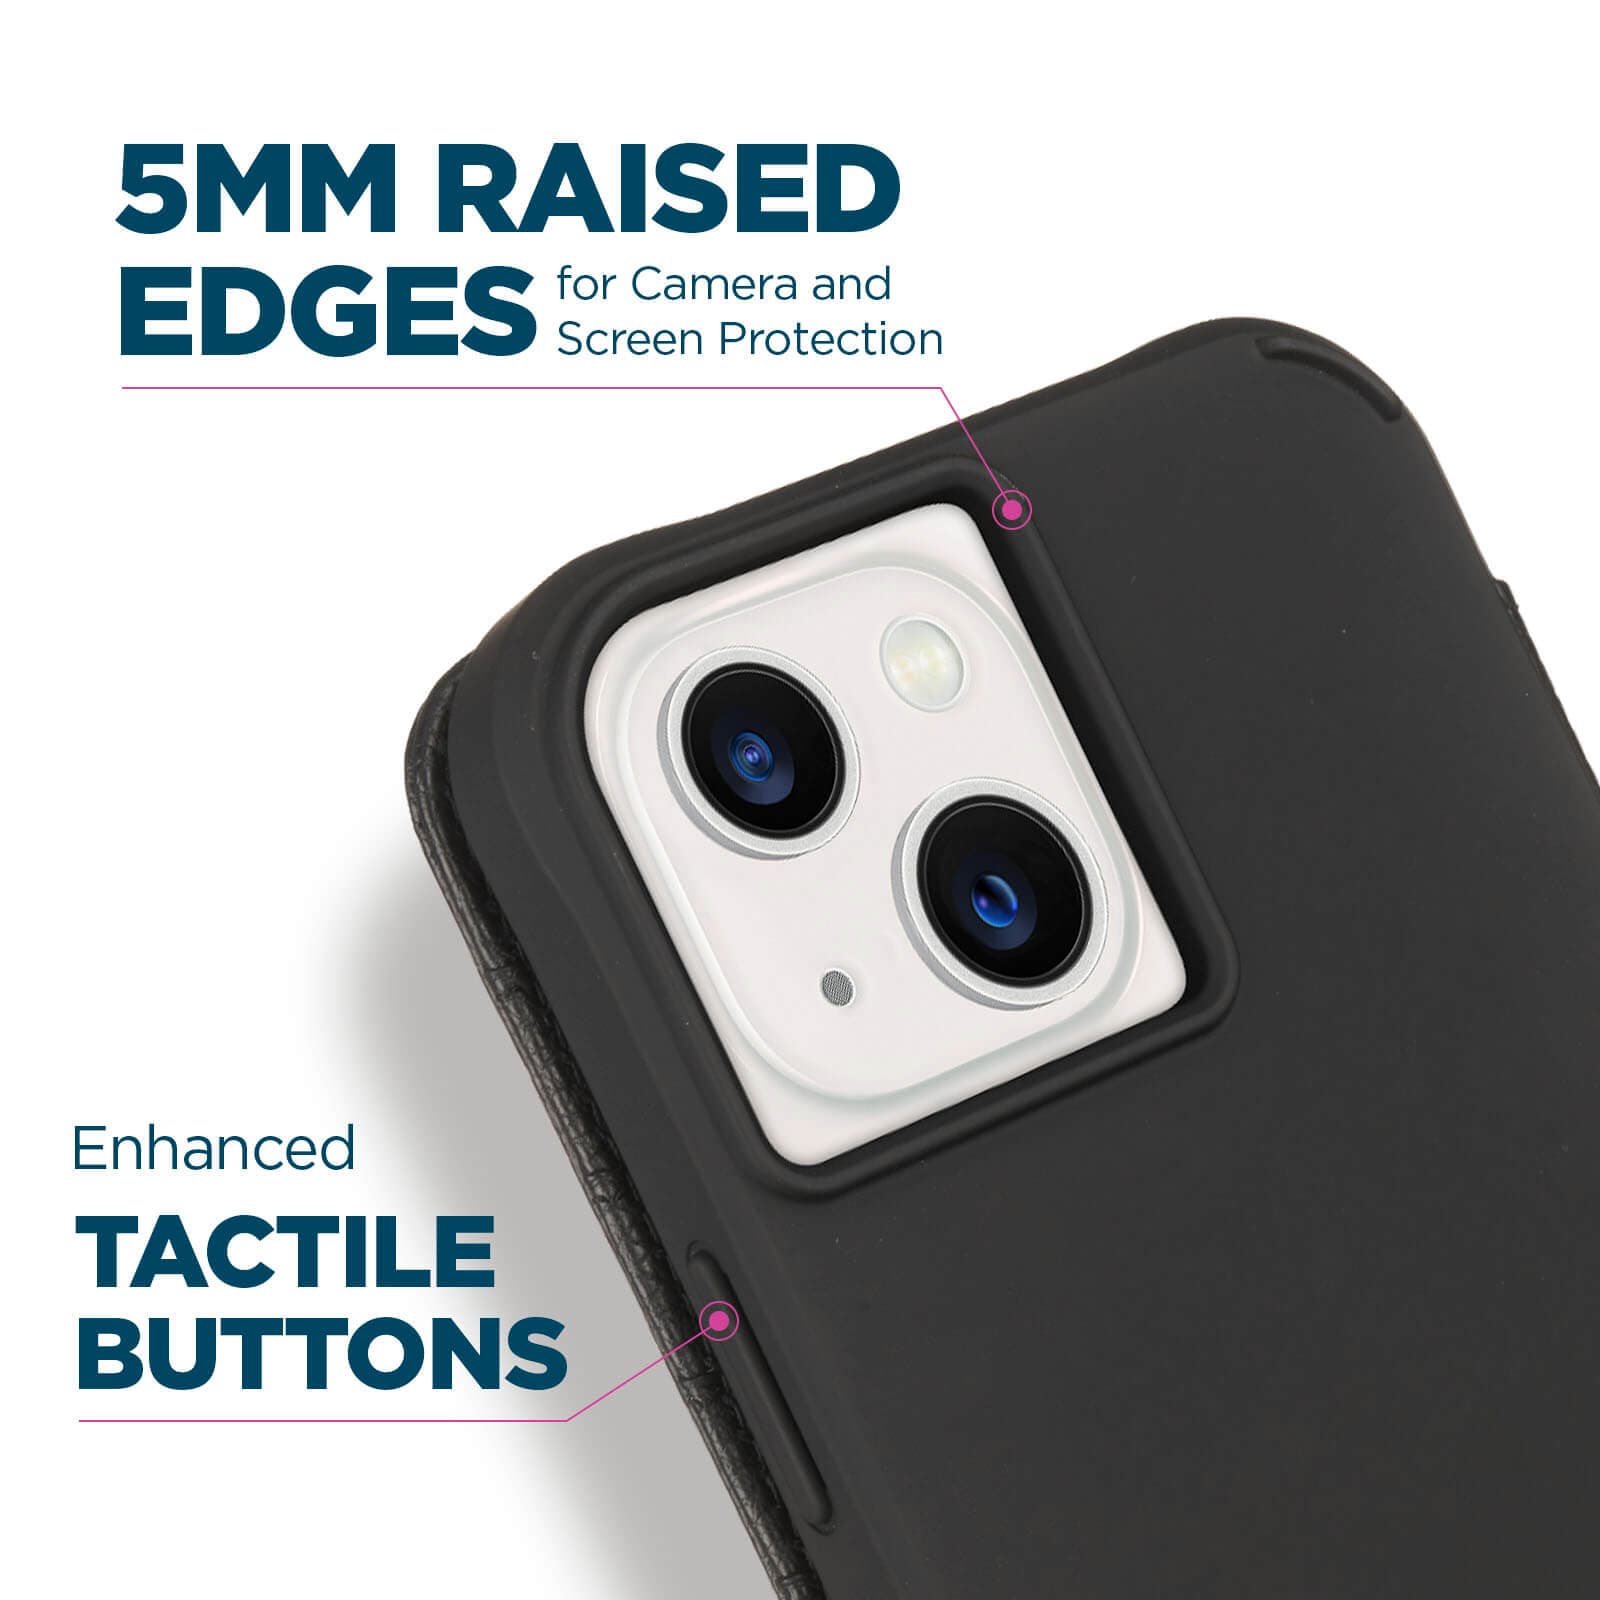 5mm raised edges for camera and screen protection. Enhanced tactile buttons. color::Black